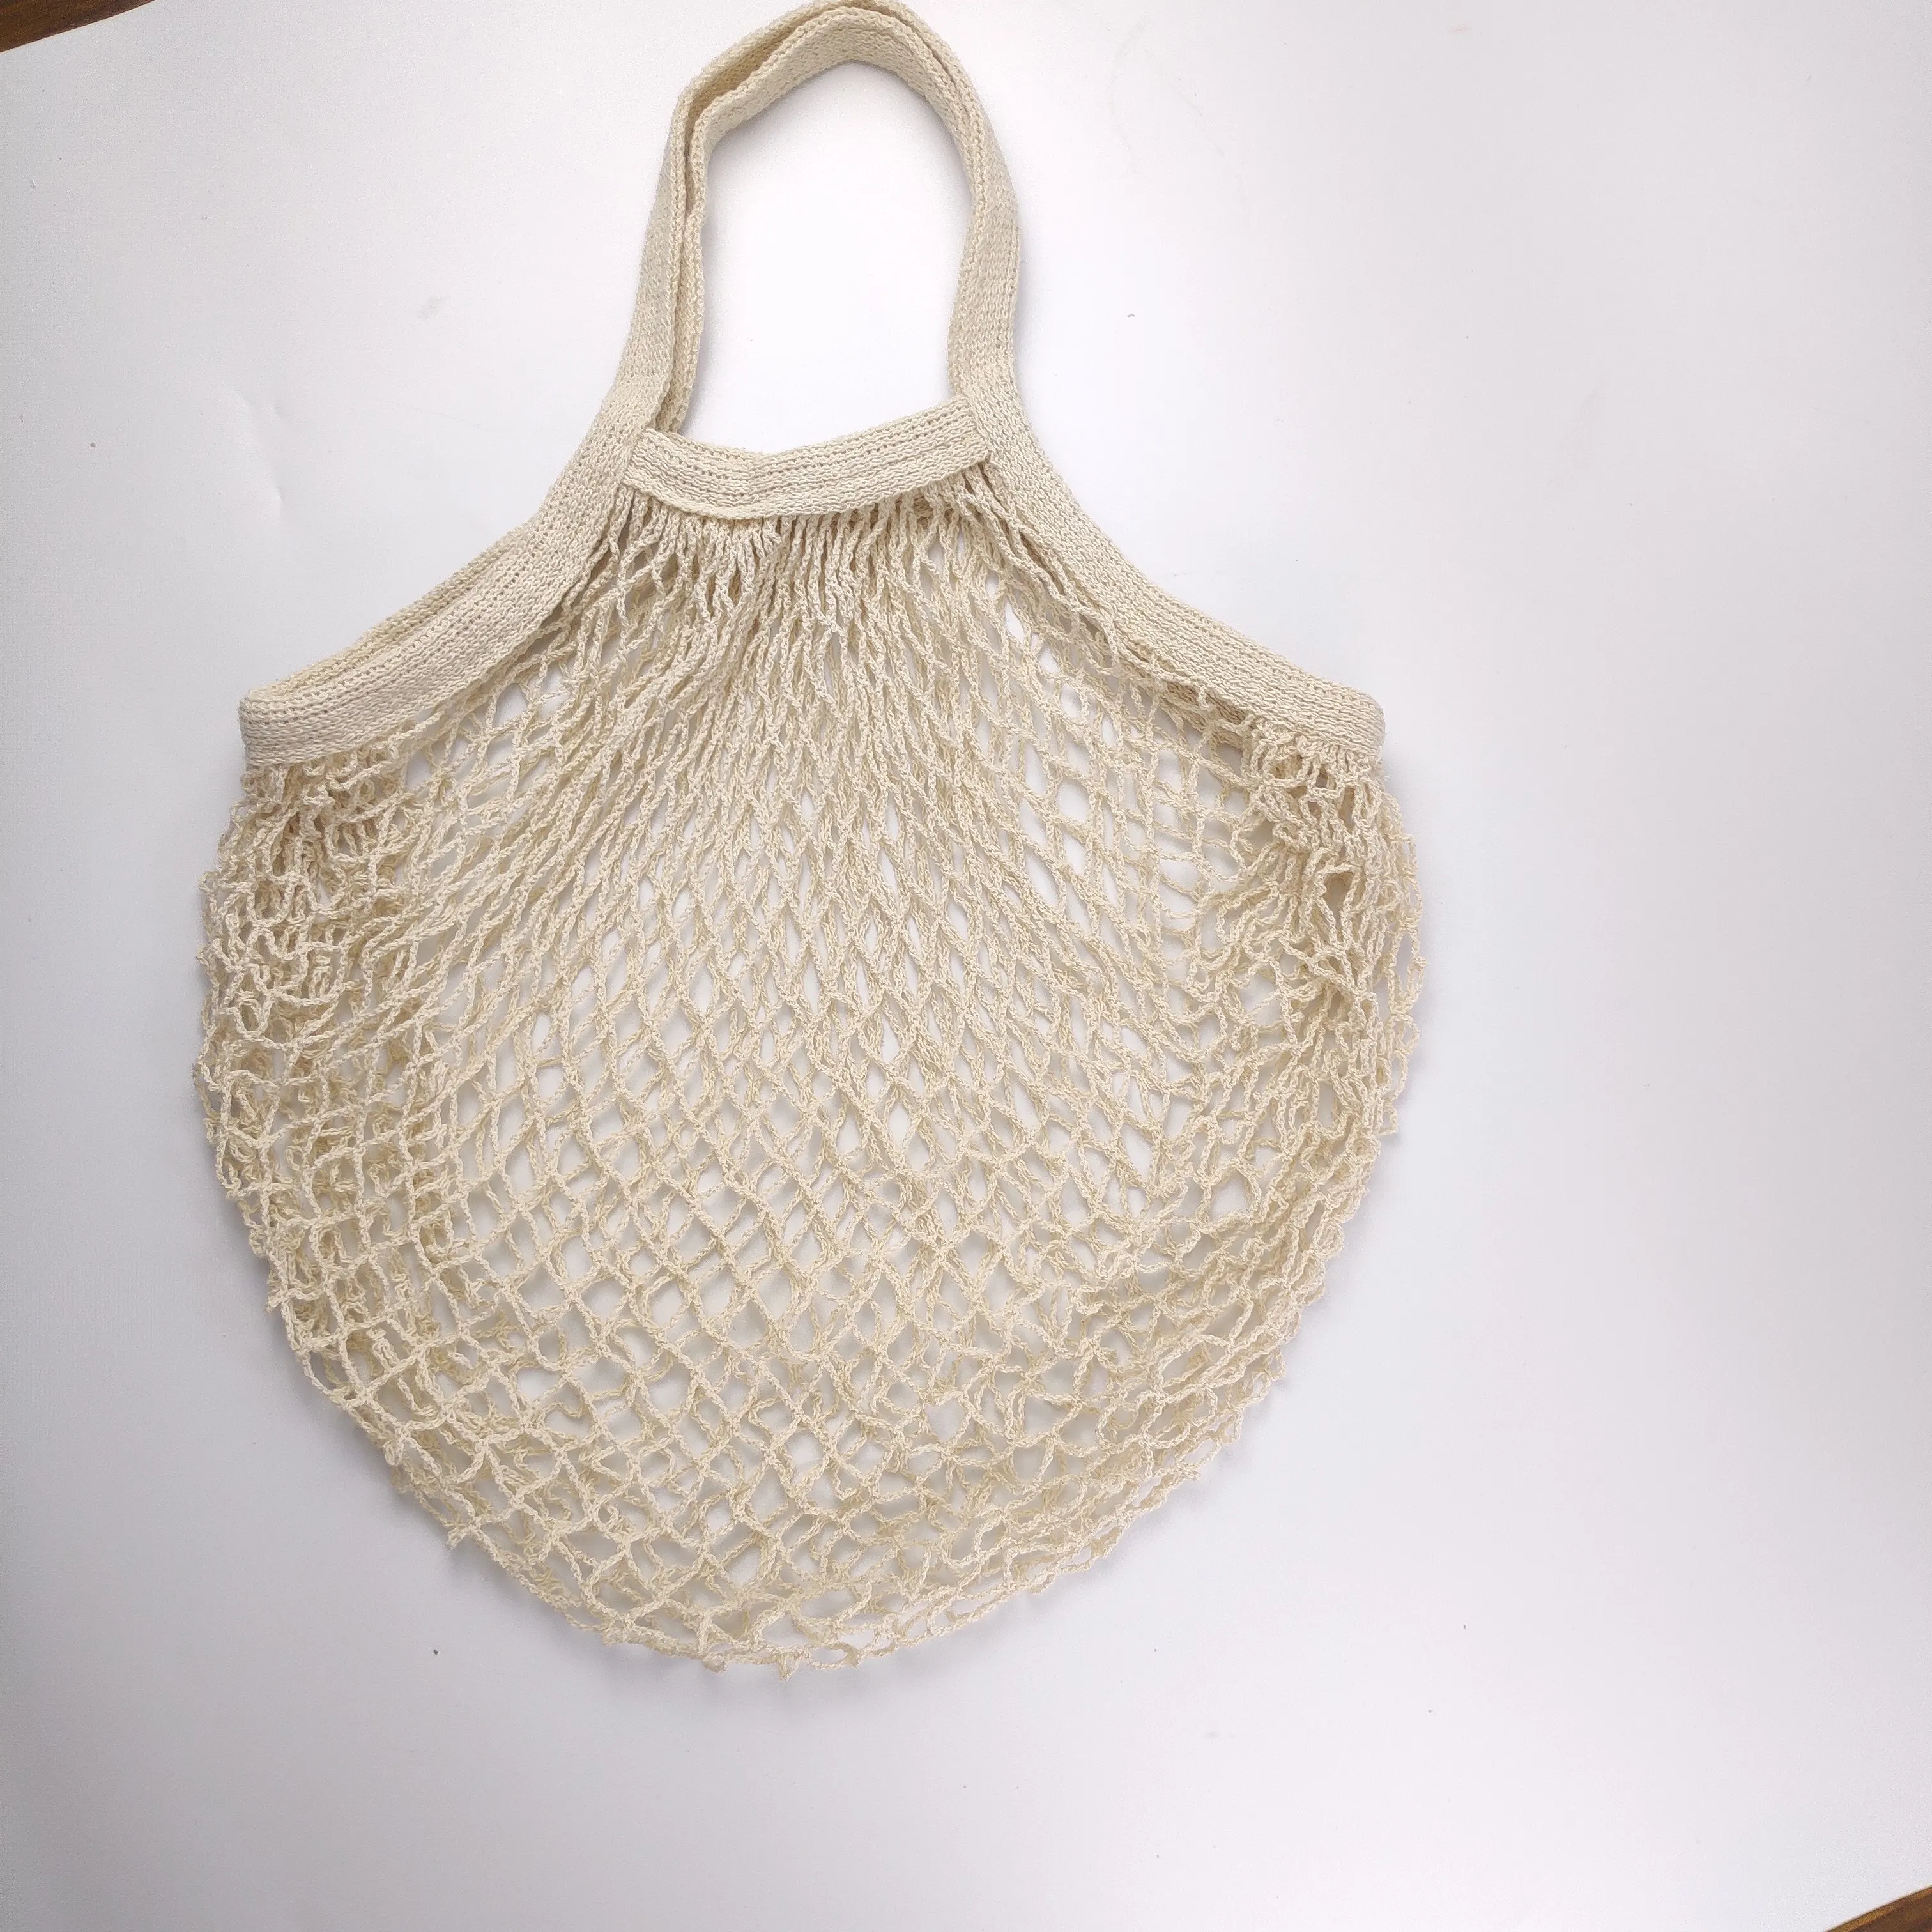 
6 PCS Reusable Produce Bags Organic Cotton Mesh Bags for Fruits and Vegetables Shopping Bag 